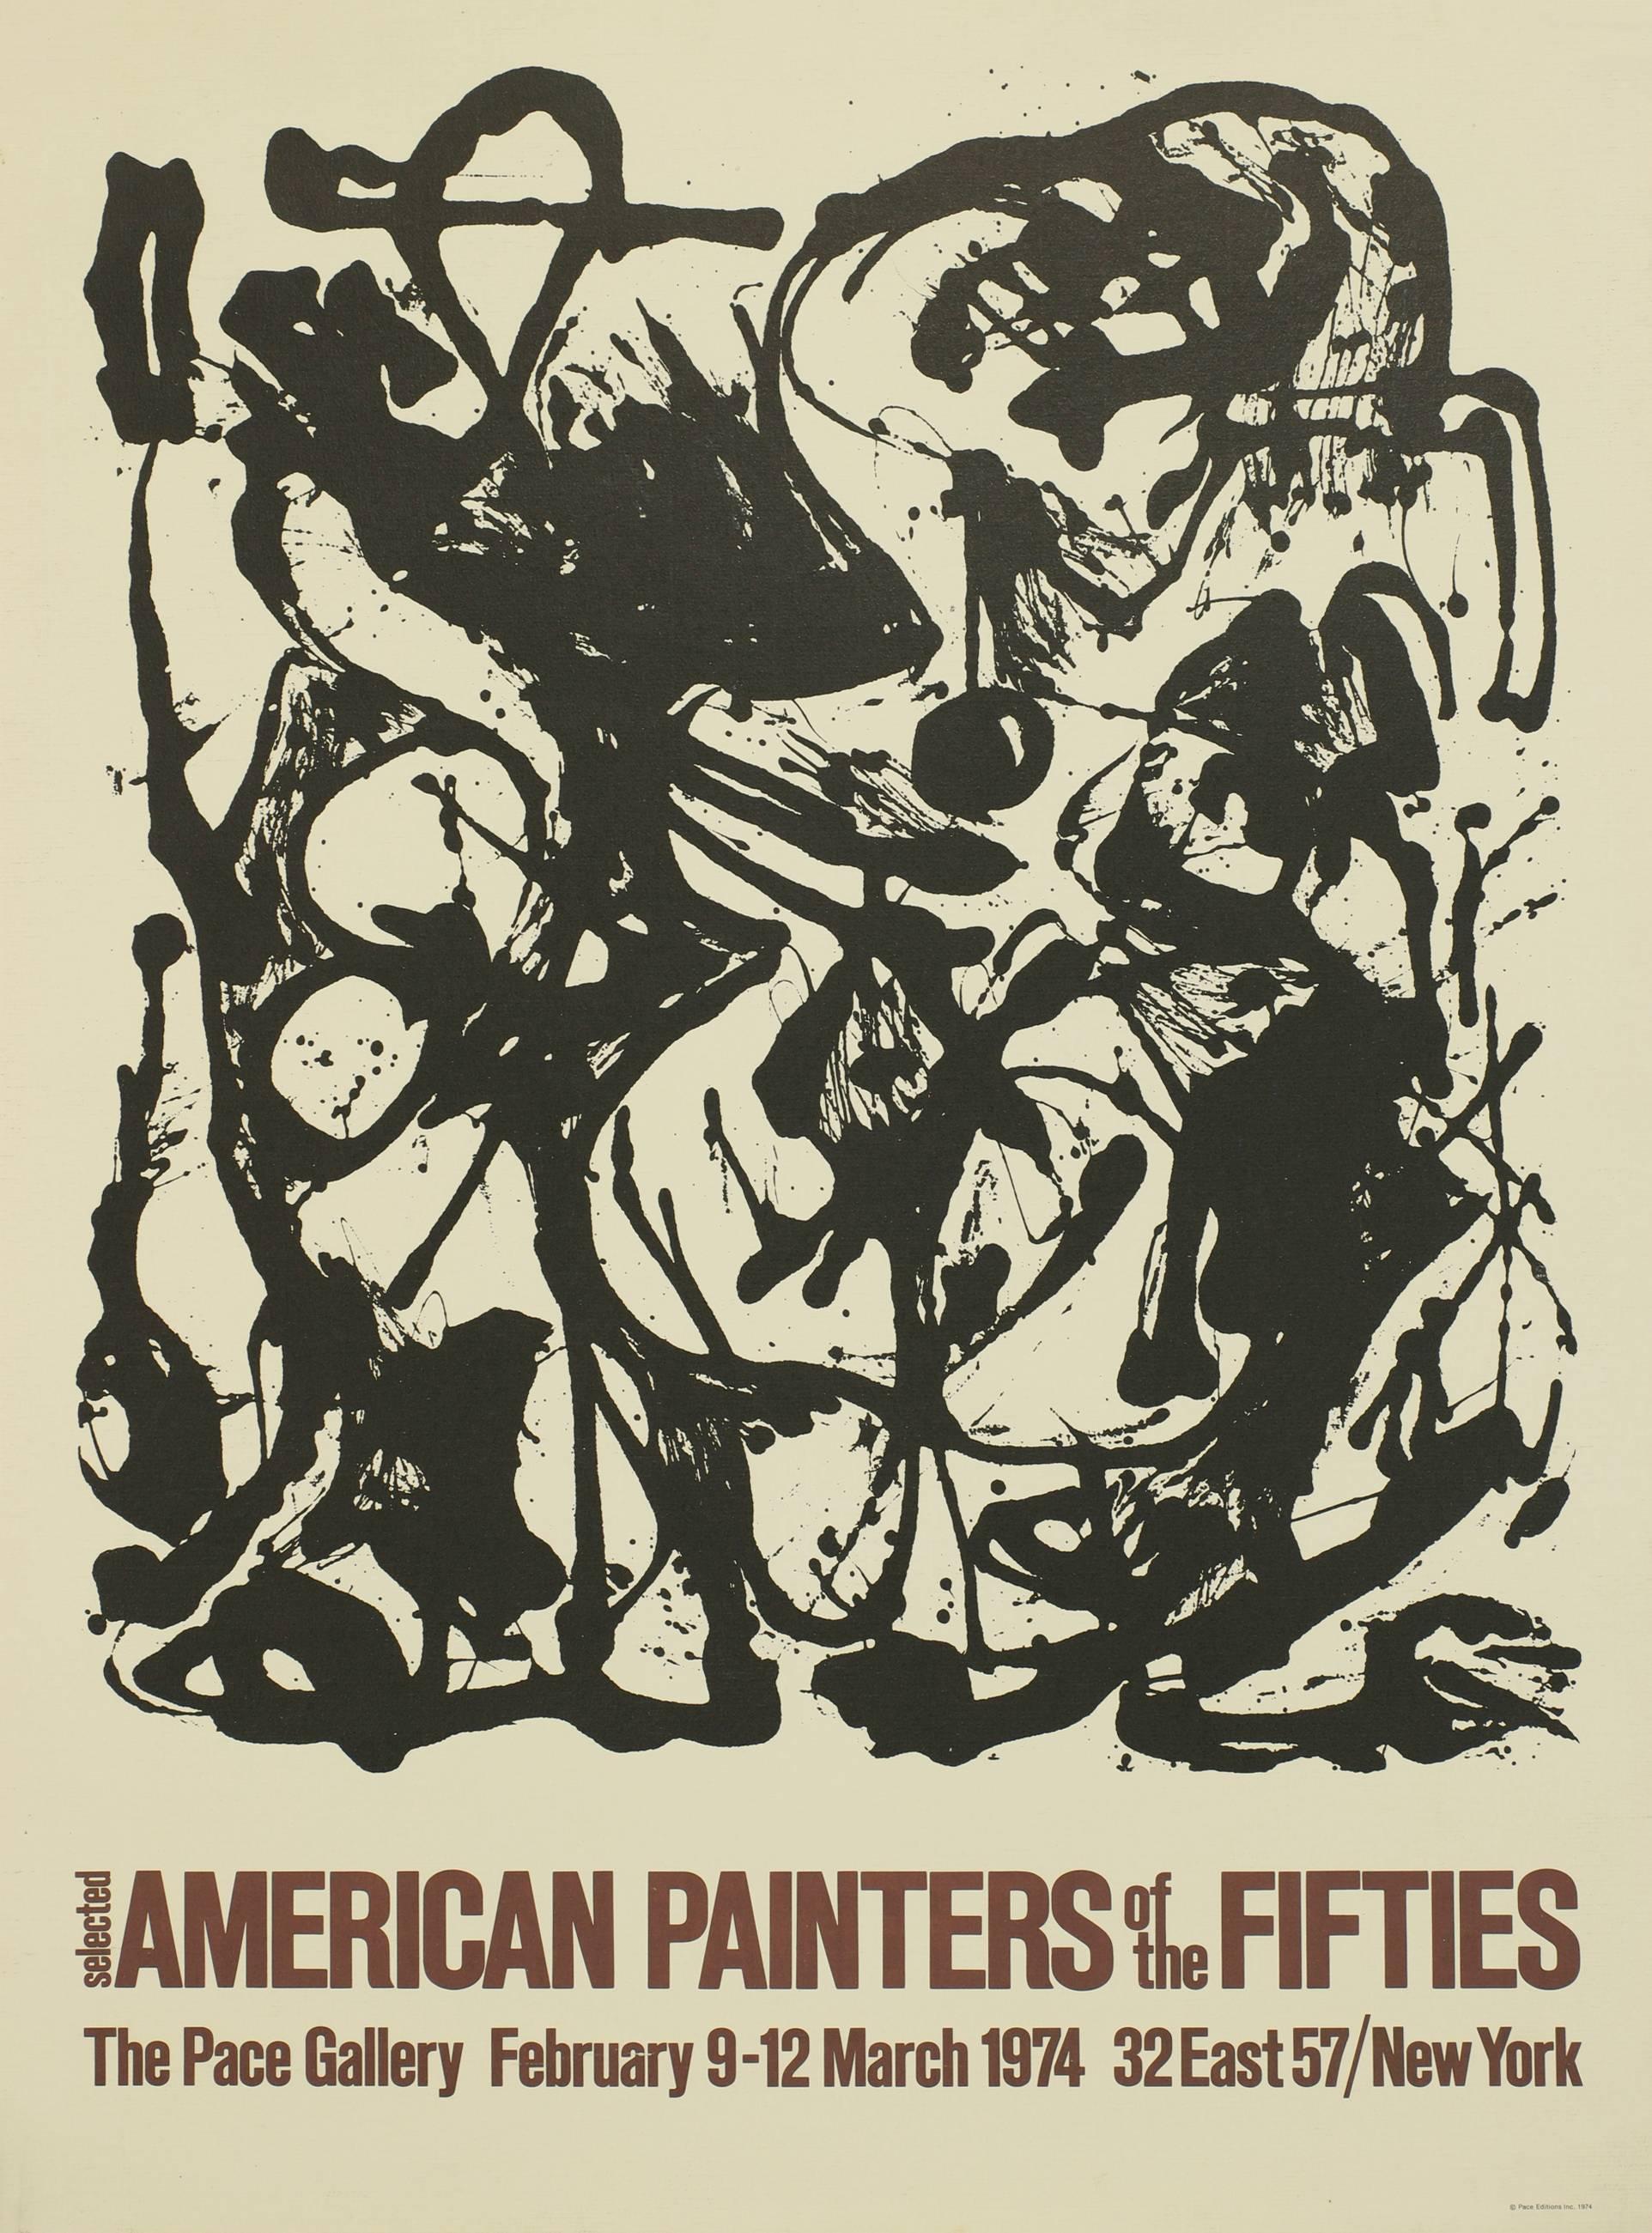 Jackson Pollock Abstract Print - Select American Painters of the Fifties